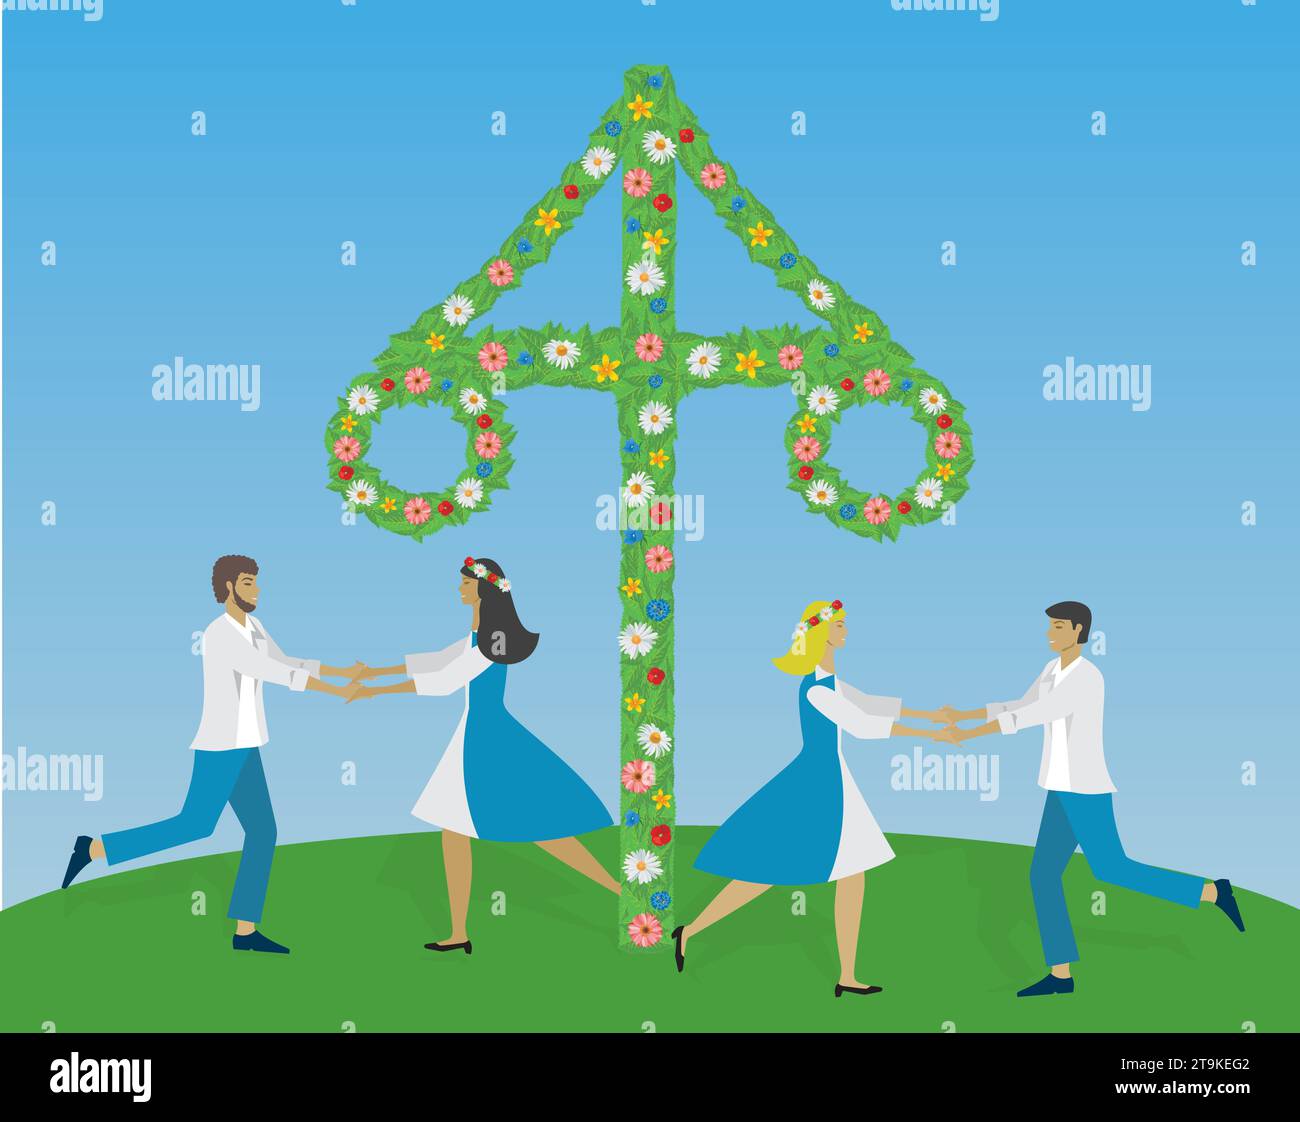 Midsummer dance. Celebration in Finland in june with dance around may pole. People dressed in traditional Finnish clothes. Vector illustration. Stock Vector